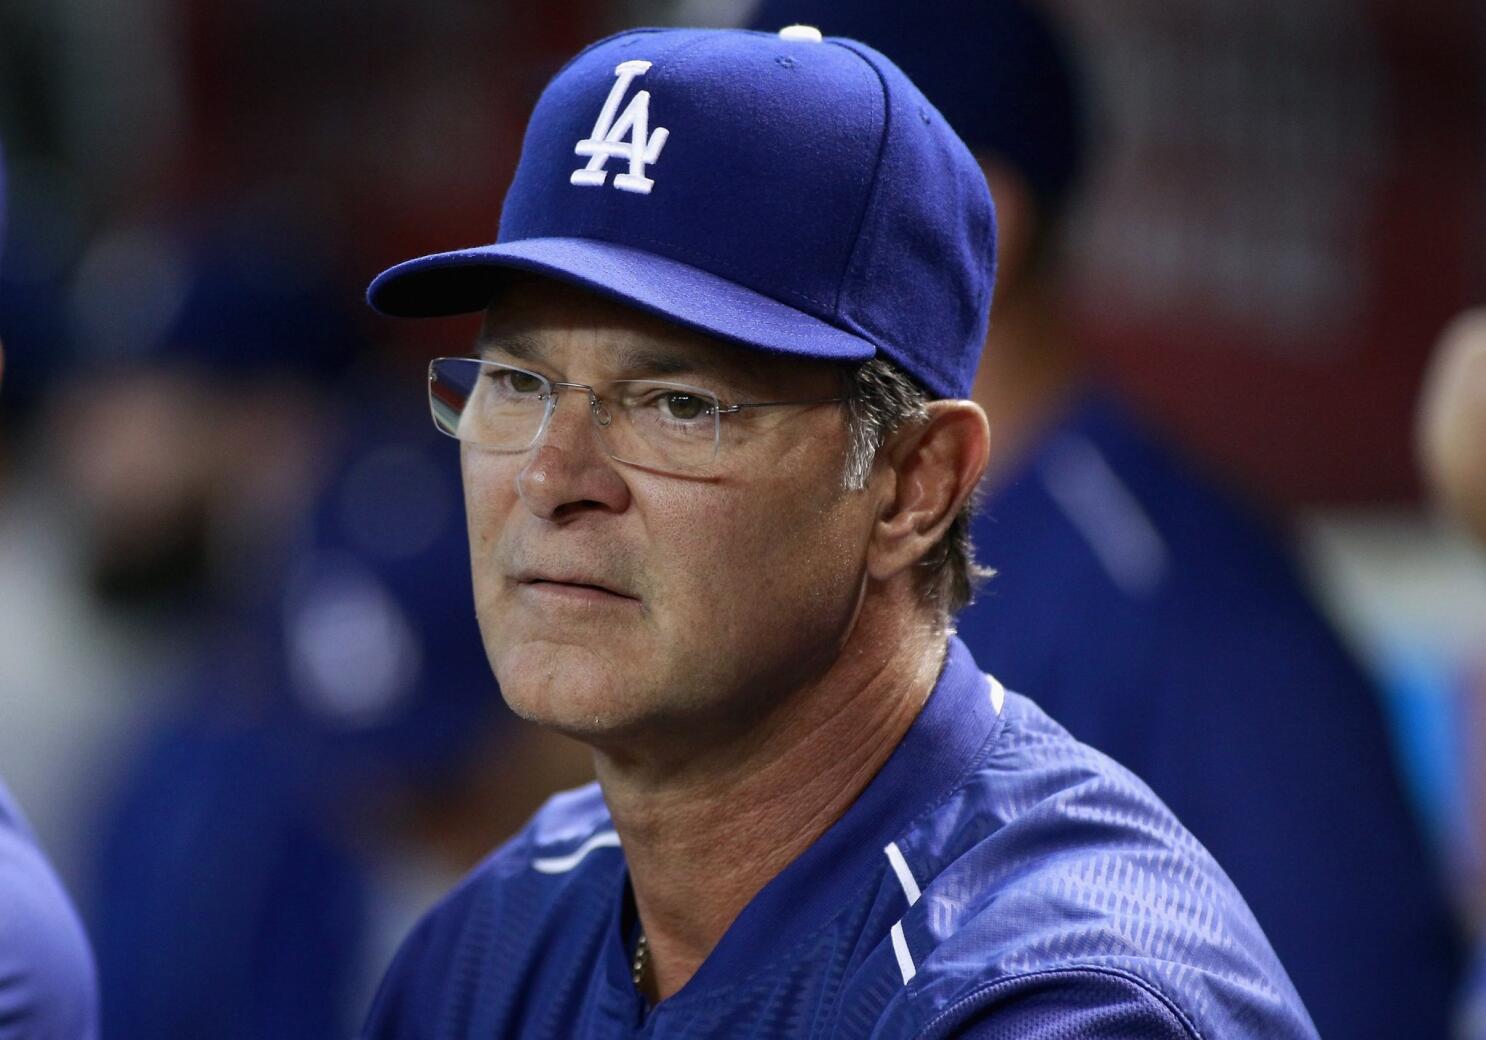 Dodgers Dugout: Did the Dodgers do the right thing by parting ways